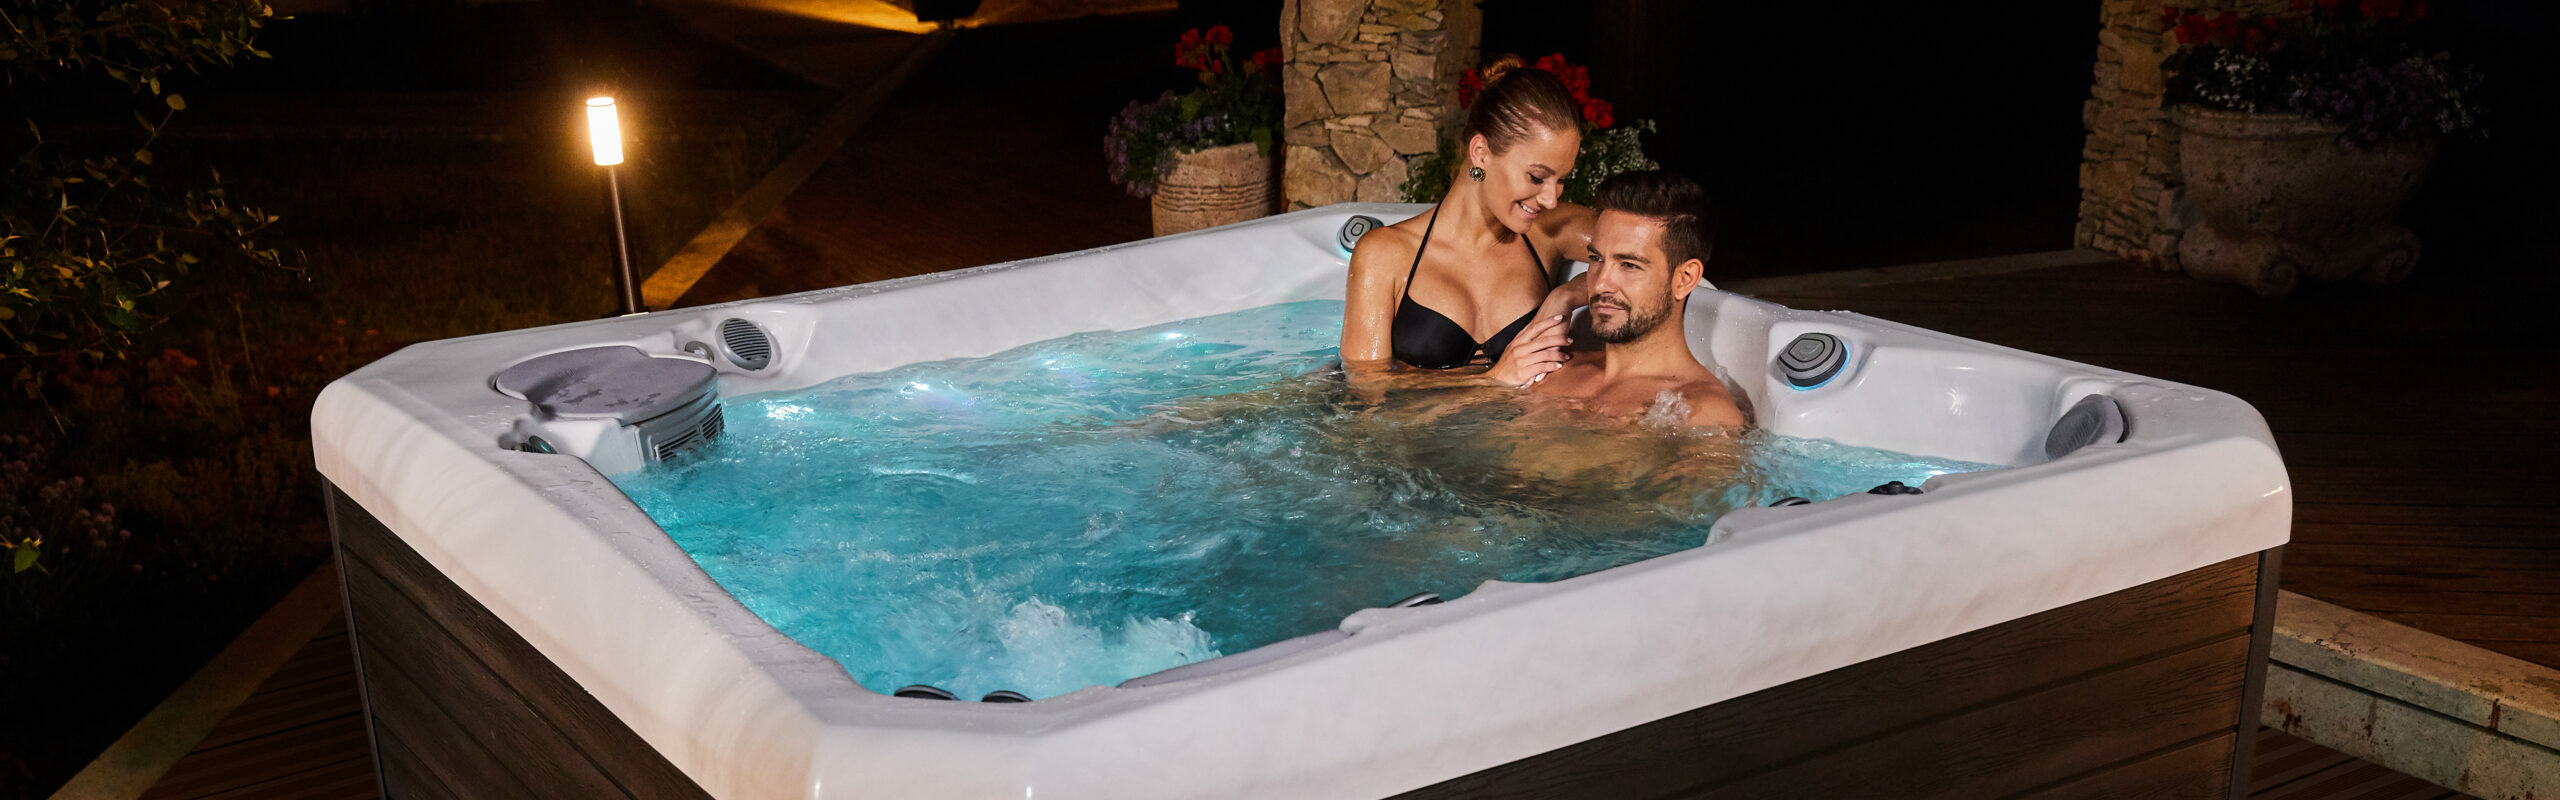 3 Hot Tub Accessories Perfect for Winter